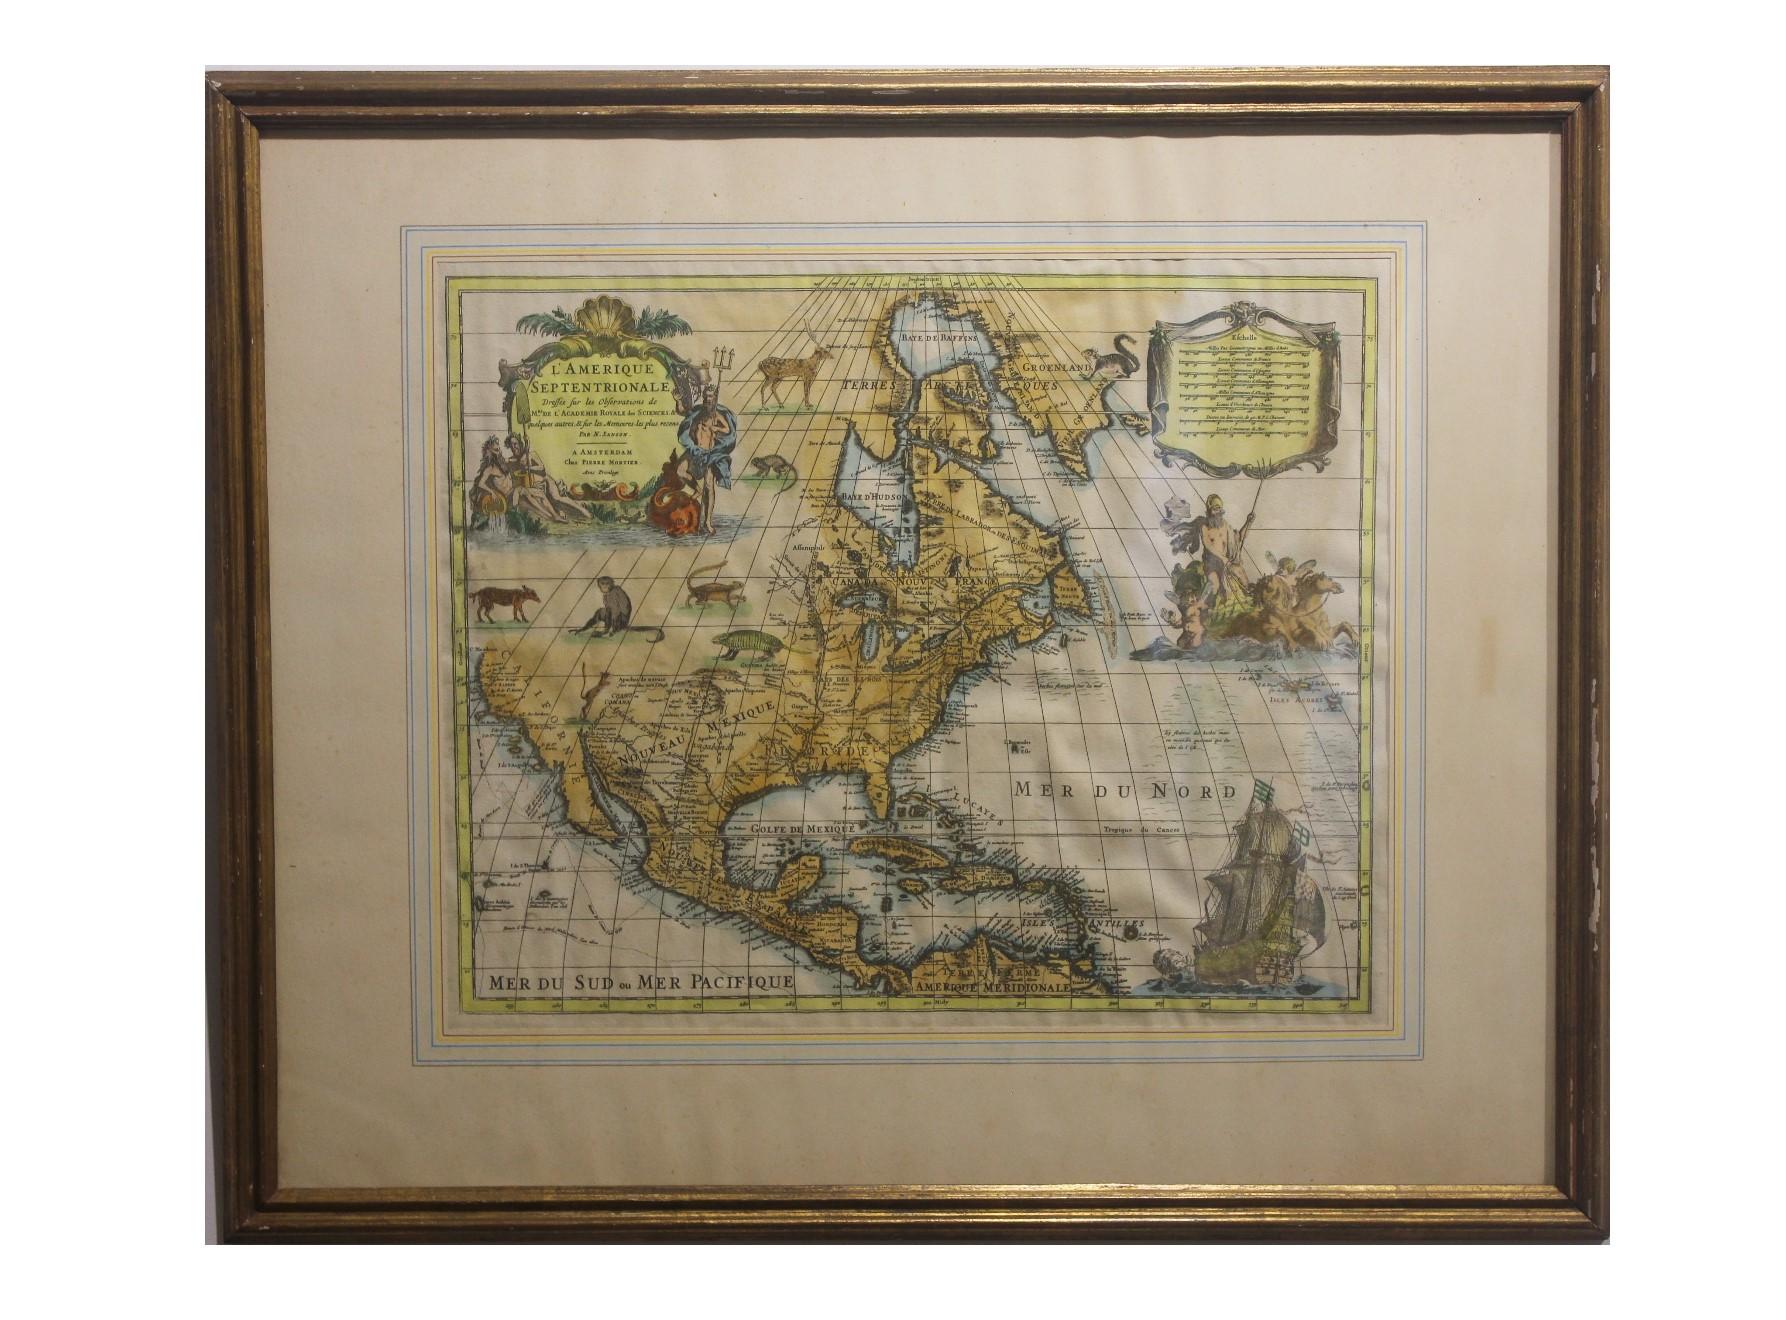 New Revised North America Map with Mythical Figures and Animals - Print by Chez Pierre Mortier